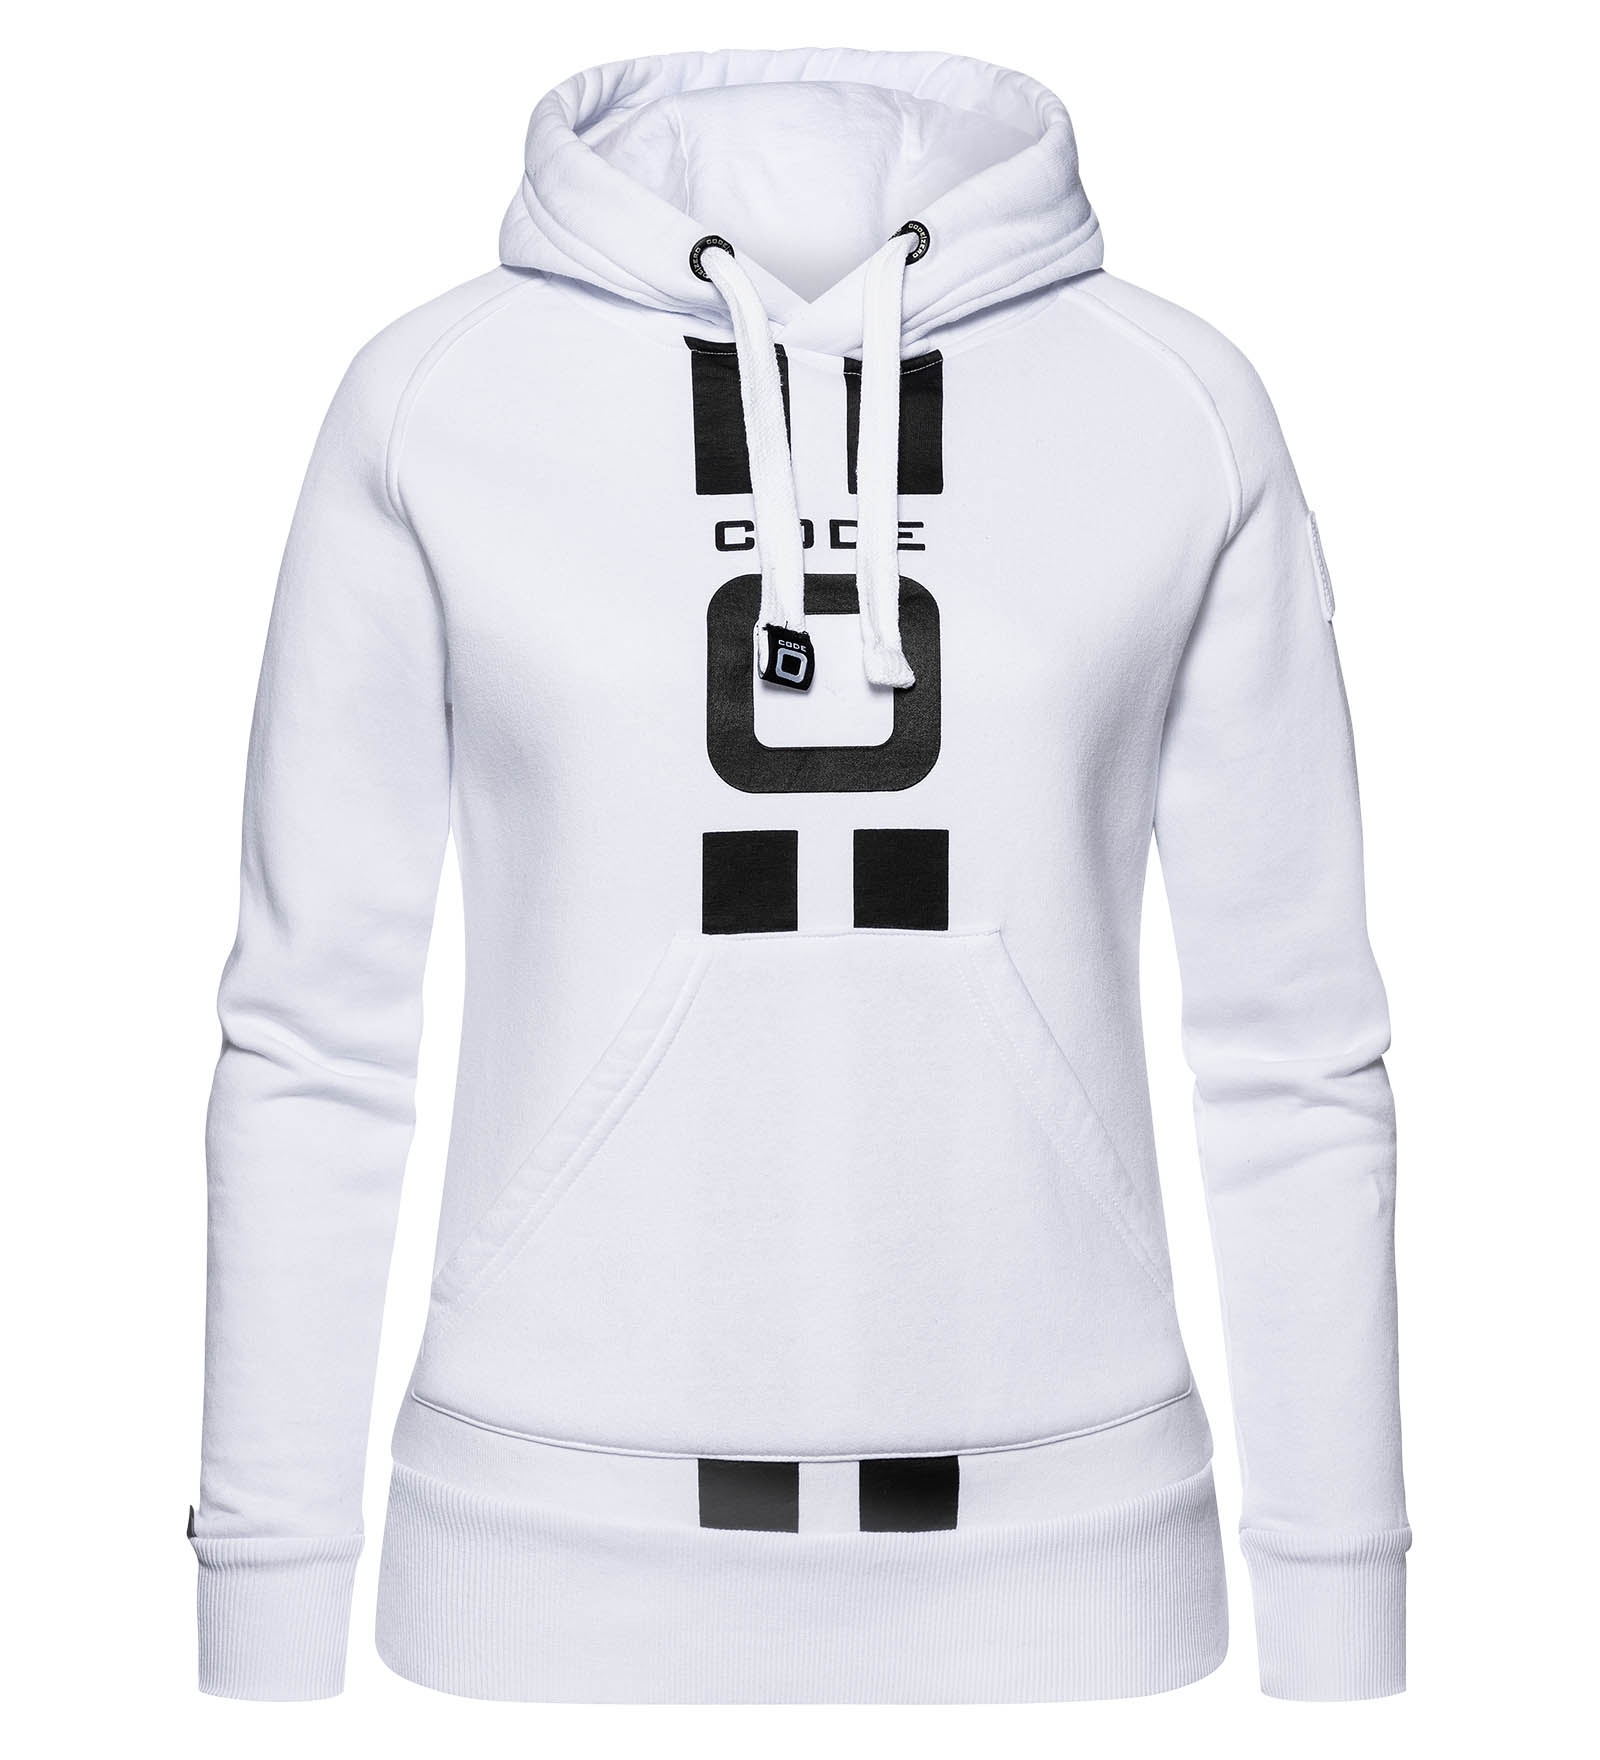 Hoodie for women in white